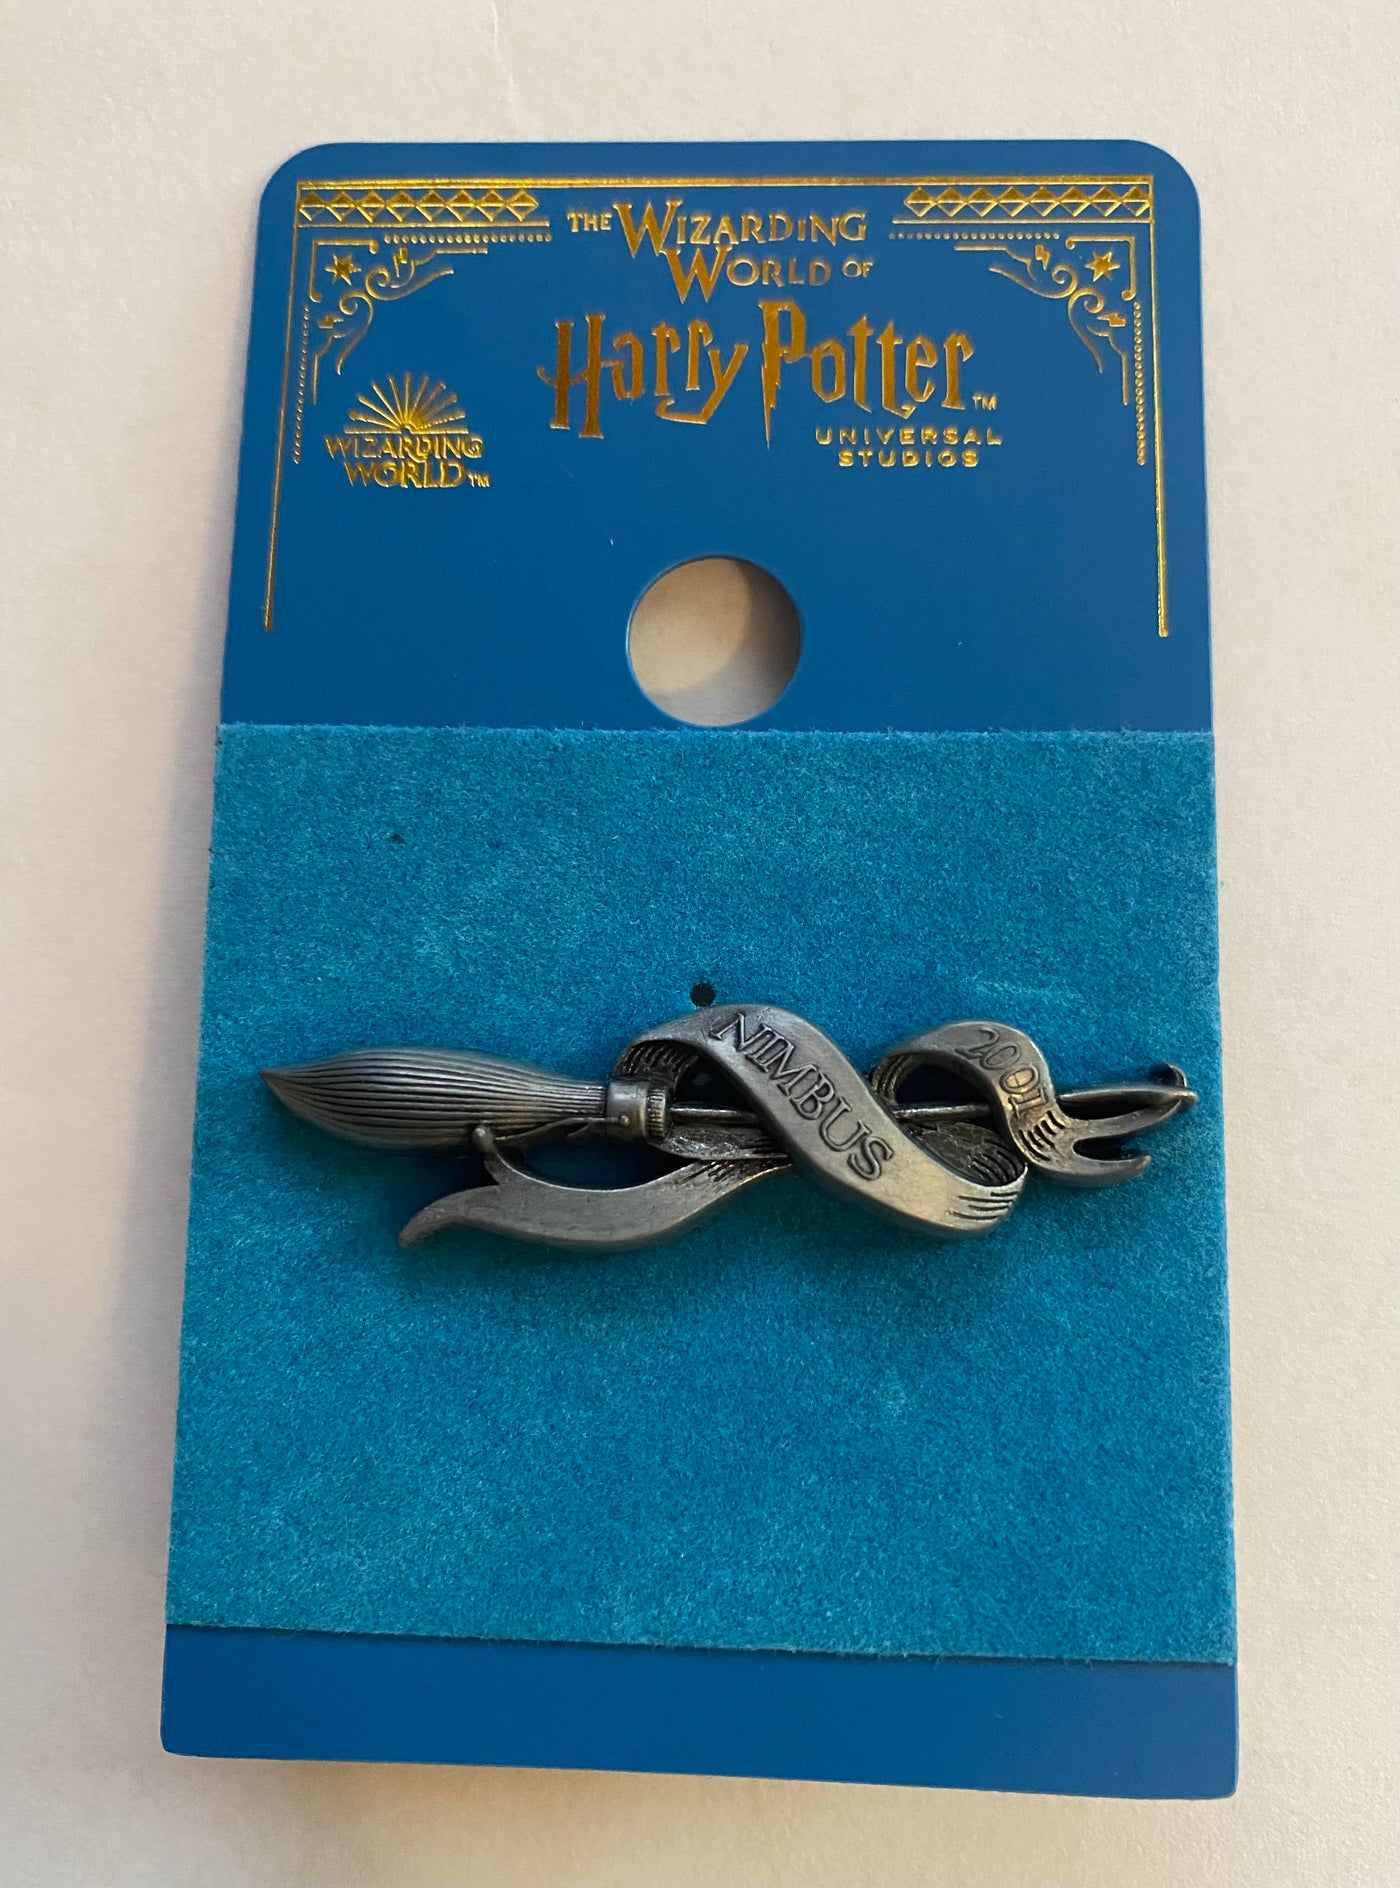 Universal Studios Harry Potter Ninmbus 2001 Broom Quidditch Pin New with Card